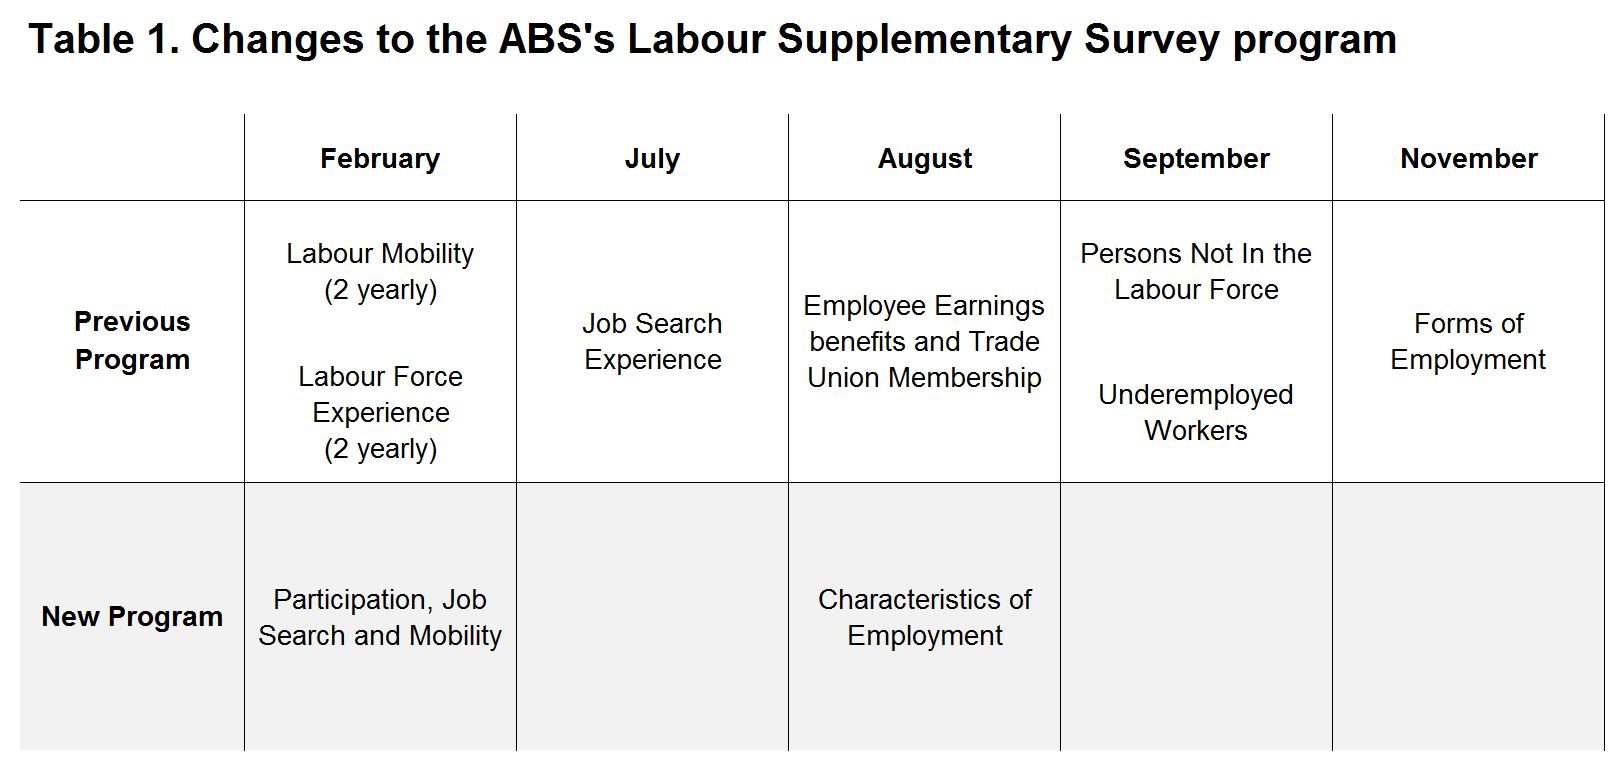 Table 1: Changes to the ABS's Labour Supplementary Survey program